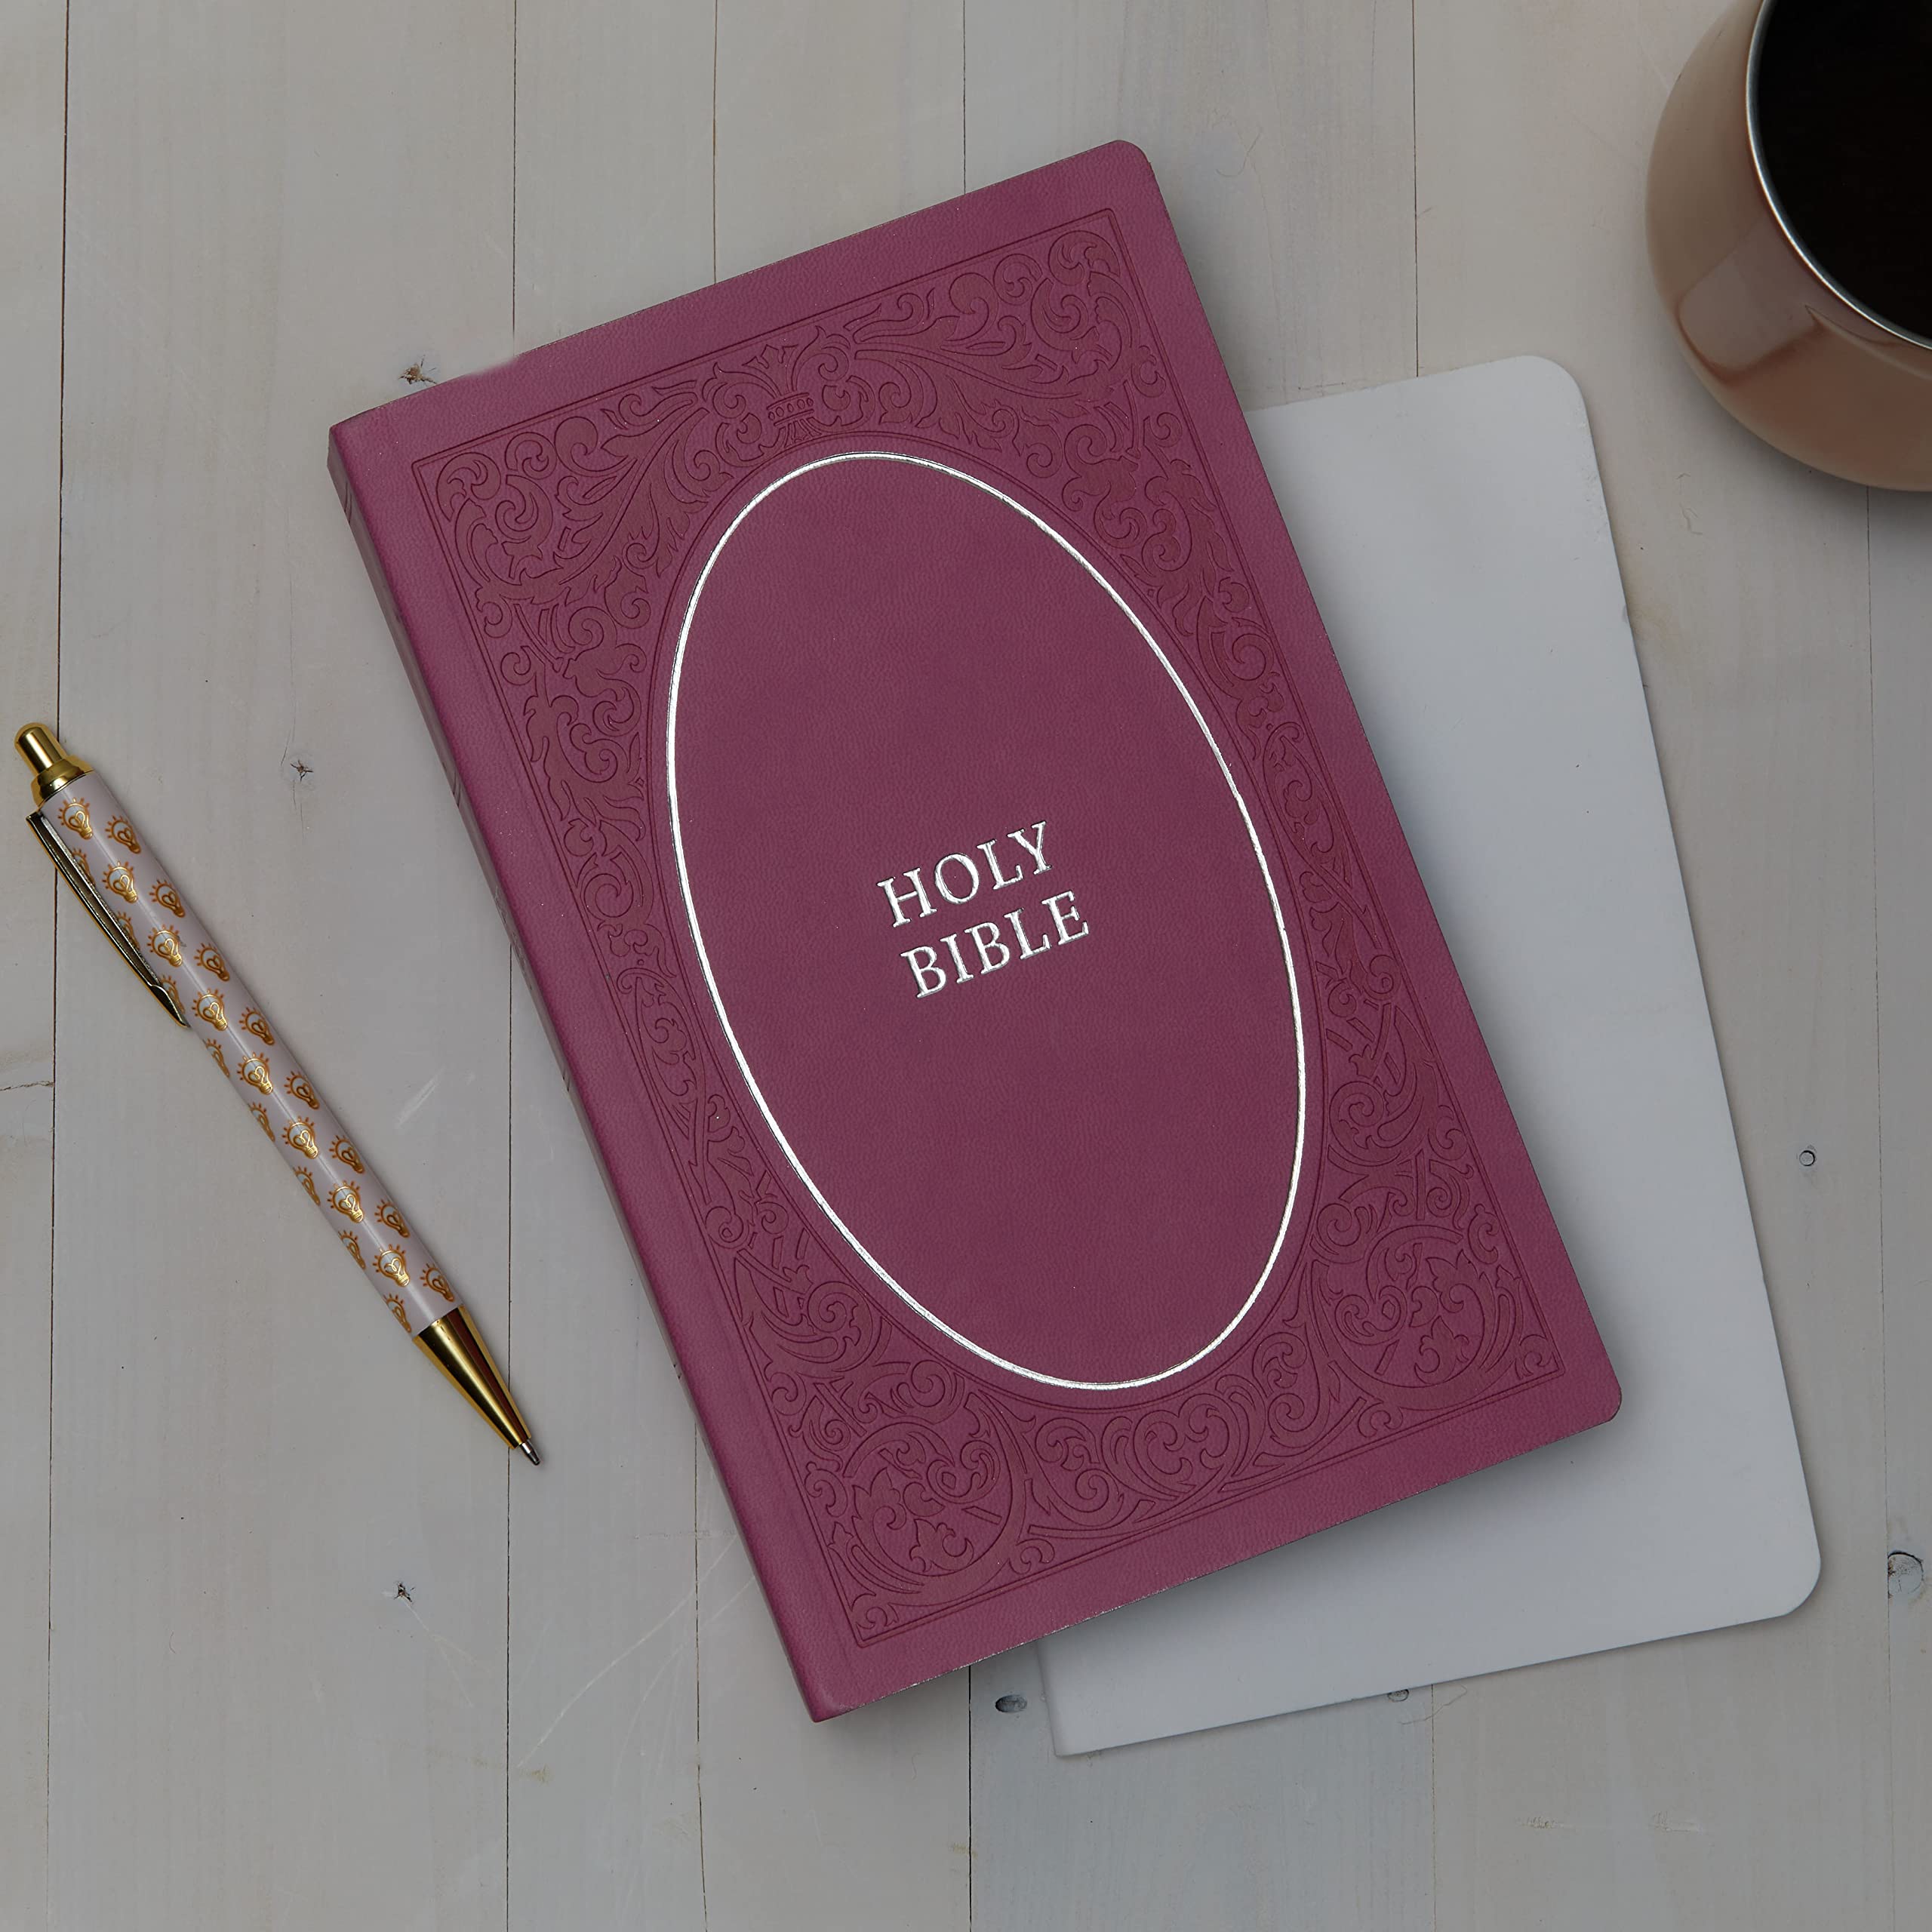 NKJV, Holy Bible, Soft Touch Edition, Leathersoft, Pink, Comfort Print: Holy Bible, New King James Version